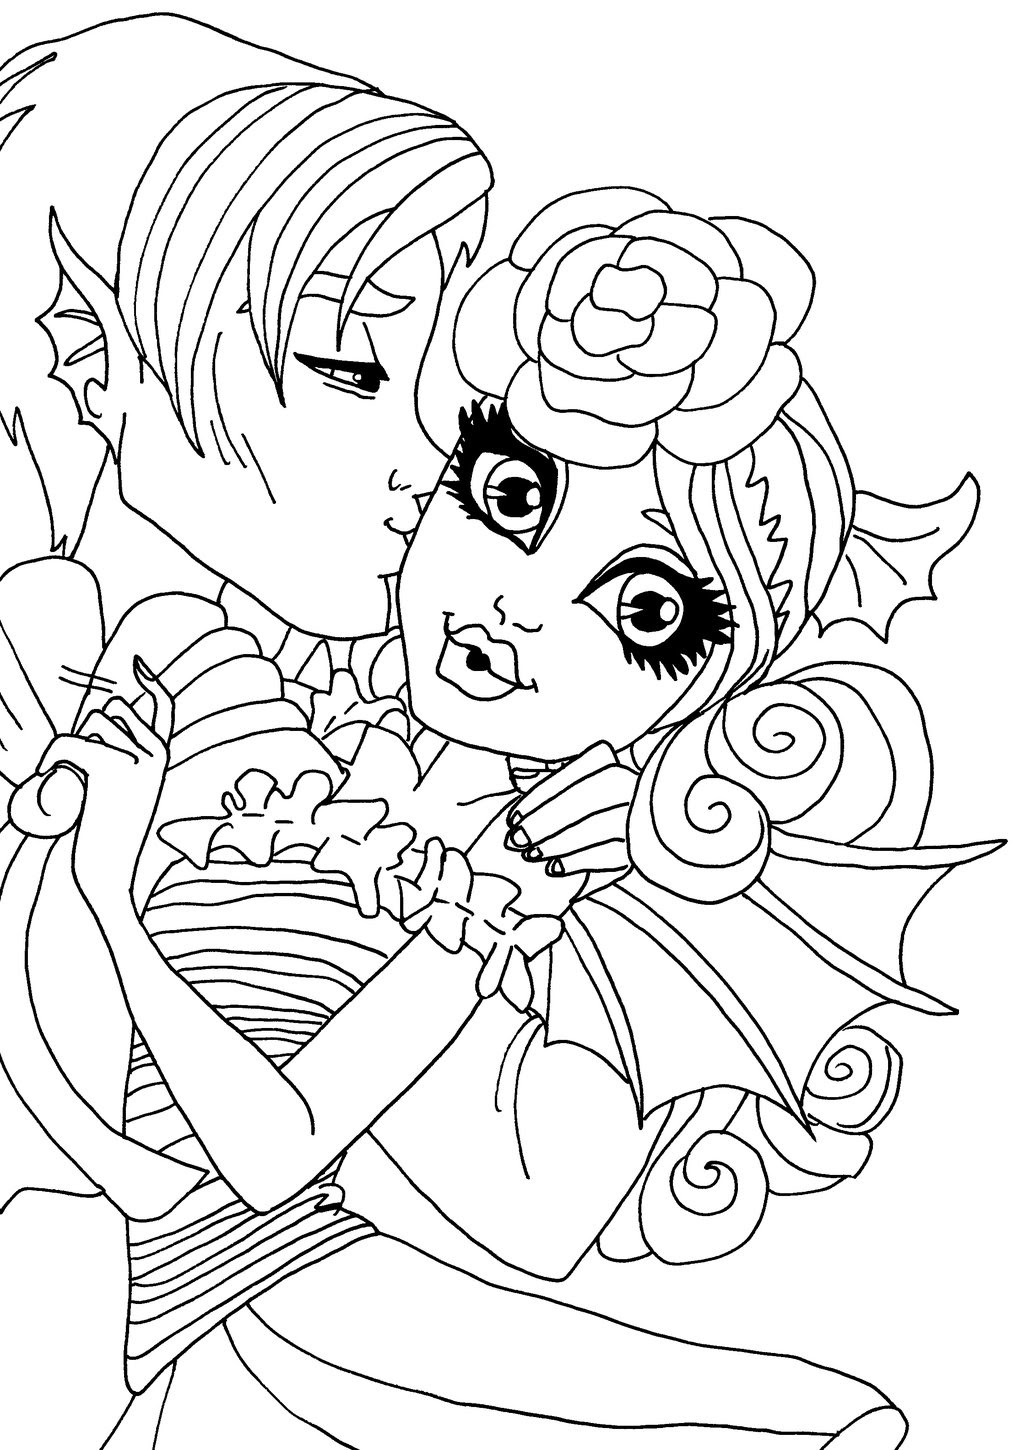 Download 239+ Monster Coloring Pages PNG PDF File